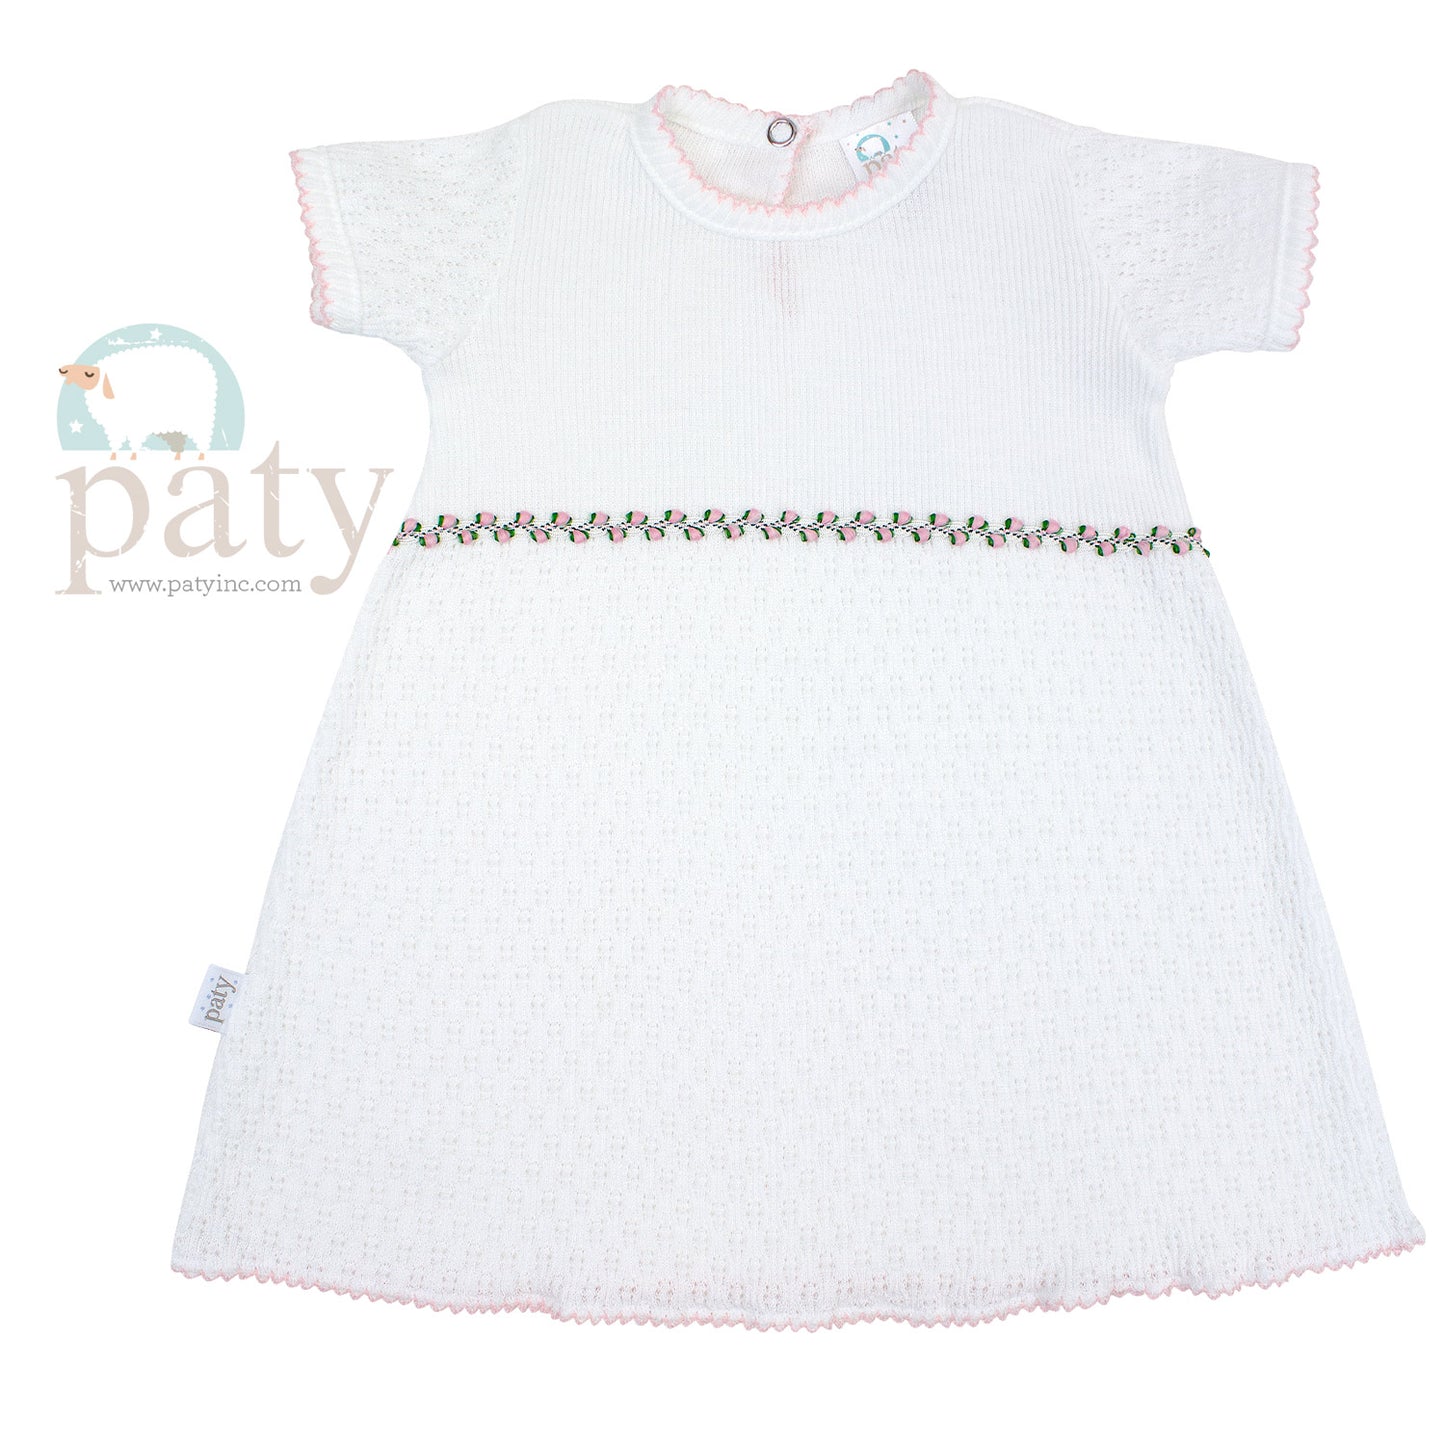 Solid white signature, 50/50 blend, paty knit accented in light pink rosebud trim.